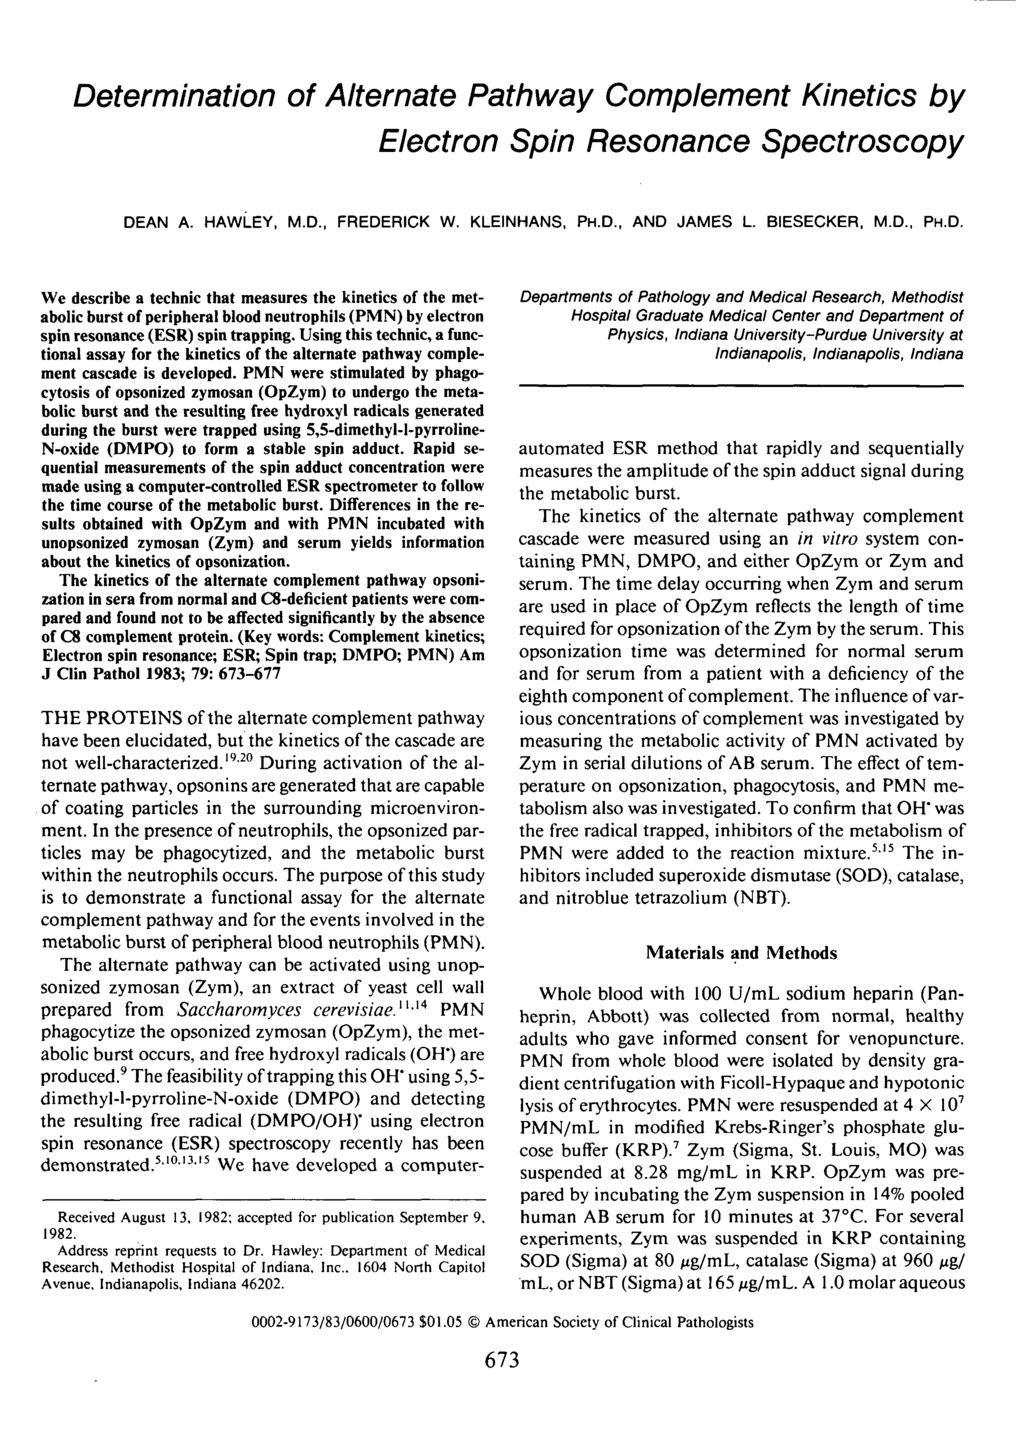 Determination of Alternate Pathway Complement Kinetics by lectron Spin Resonance Spectroscopy DAN A. HAWLY, M.D., FRDRICK W. KLINHANS, PH.D., AND JAMS L. BISCKR, M.D., PH.D. We describe a technic that measures the kinetics of the metabolic burst of peripheral blood neutrophils (PMN) by electron spin resonance (SR) spin trapping.